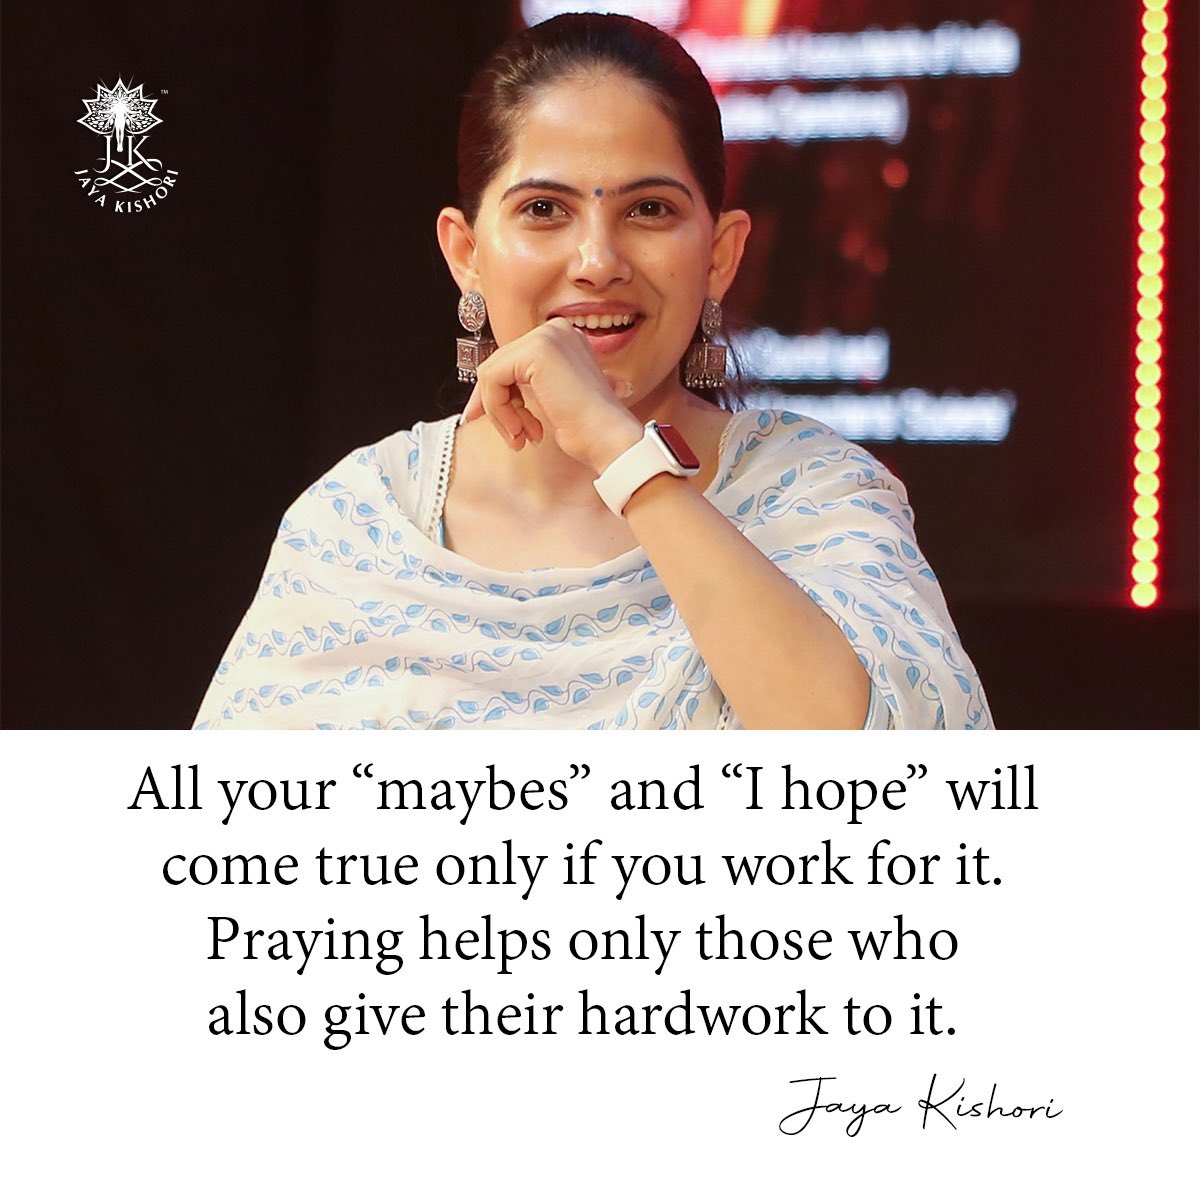 All your “maybes” and “I hope” will come true only if you work for it. Praying helps only those who also give their hardwork to it. #jayakishori #jayakishorimotivation #dailymotivation #motivationalquotes #harekrishna